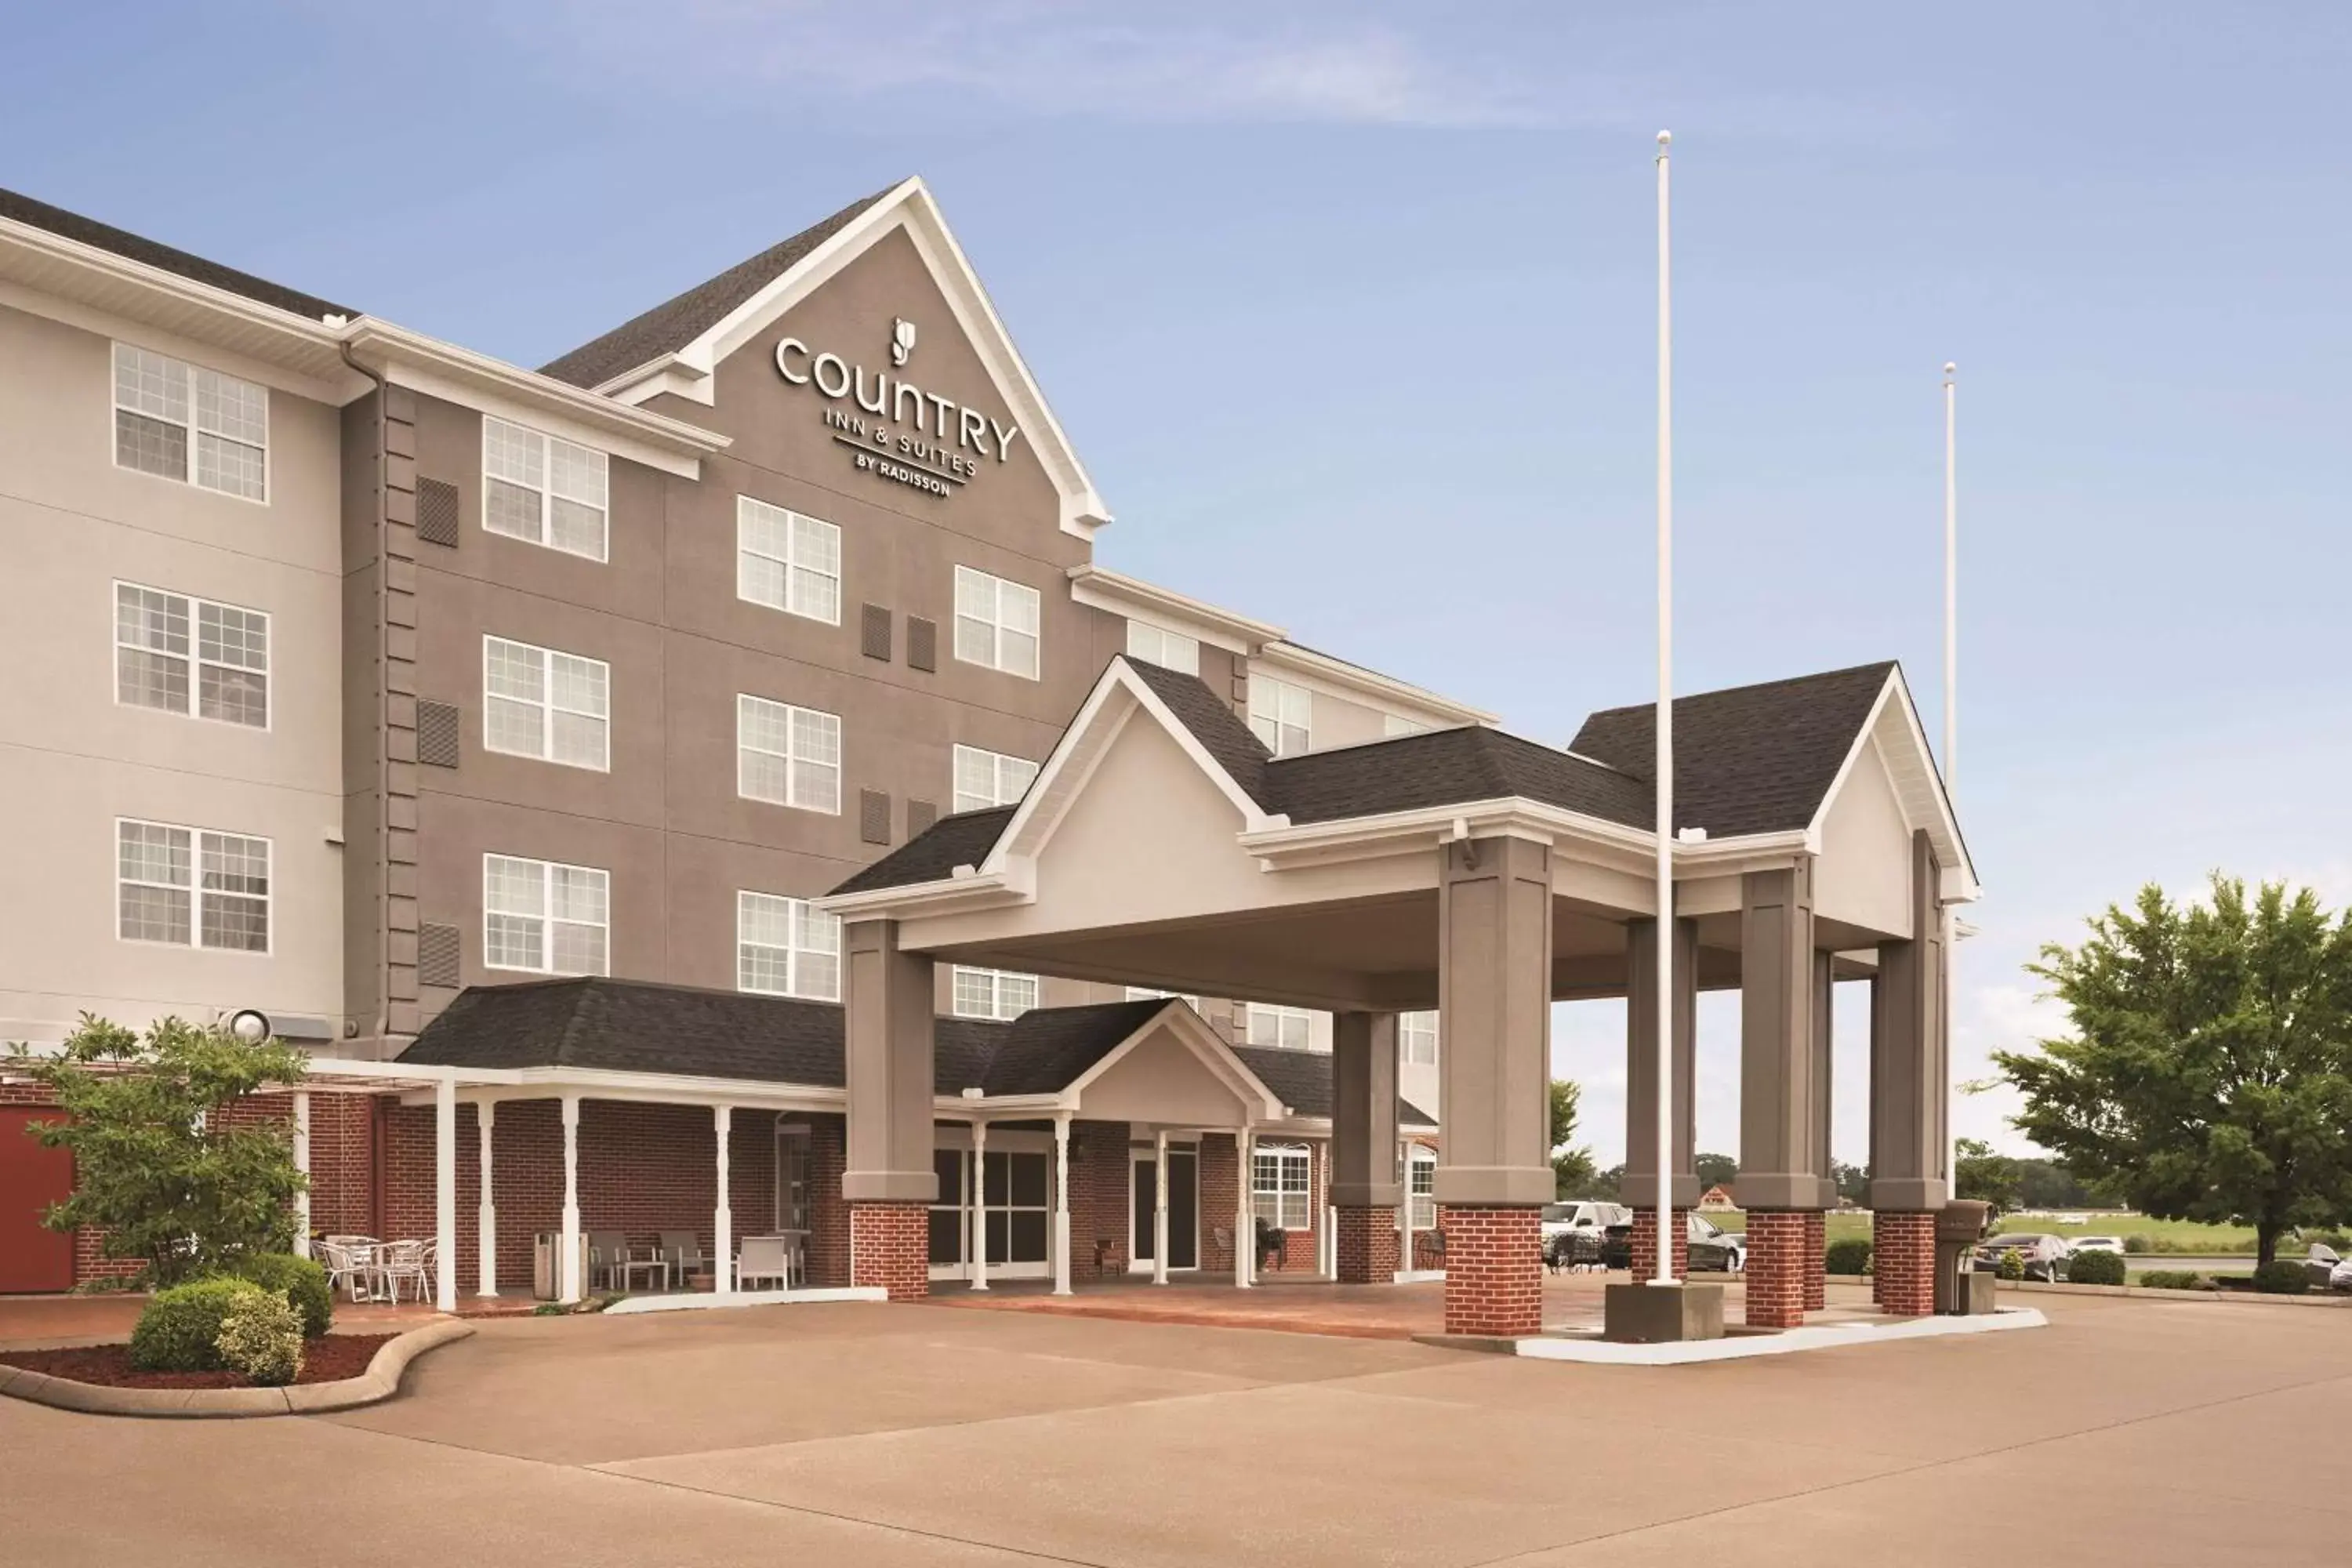 Property Building in Country Inn & Suites by Radisson, Bowling Green, KY